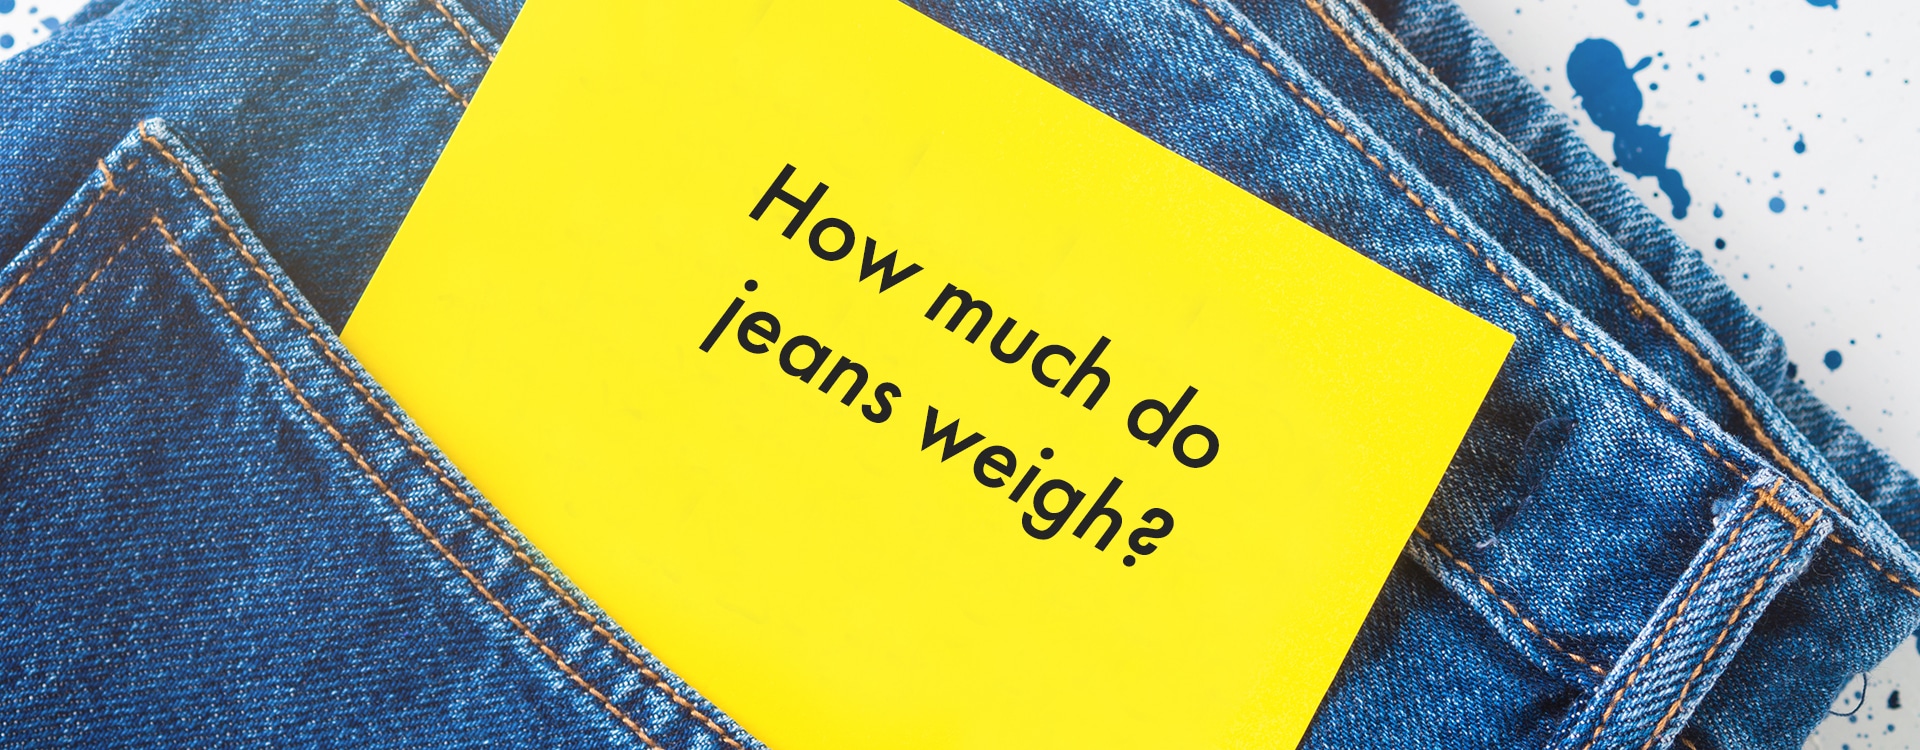 How much do jeans weigh feature